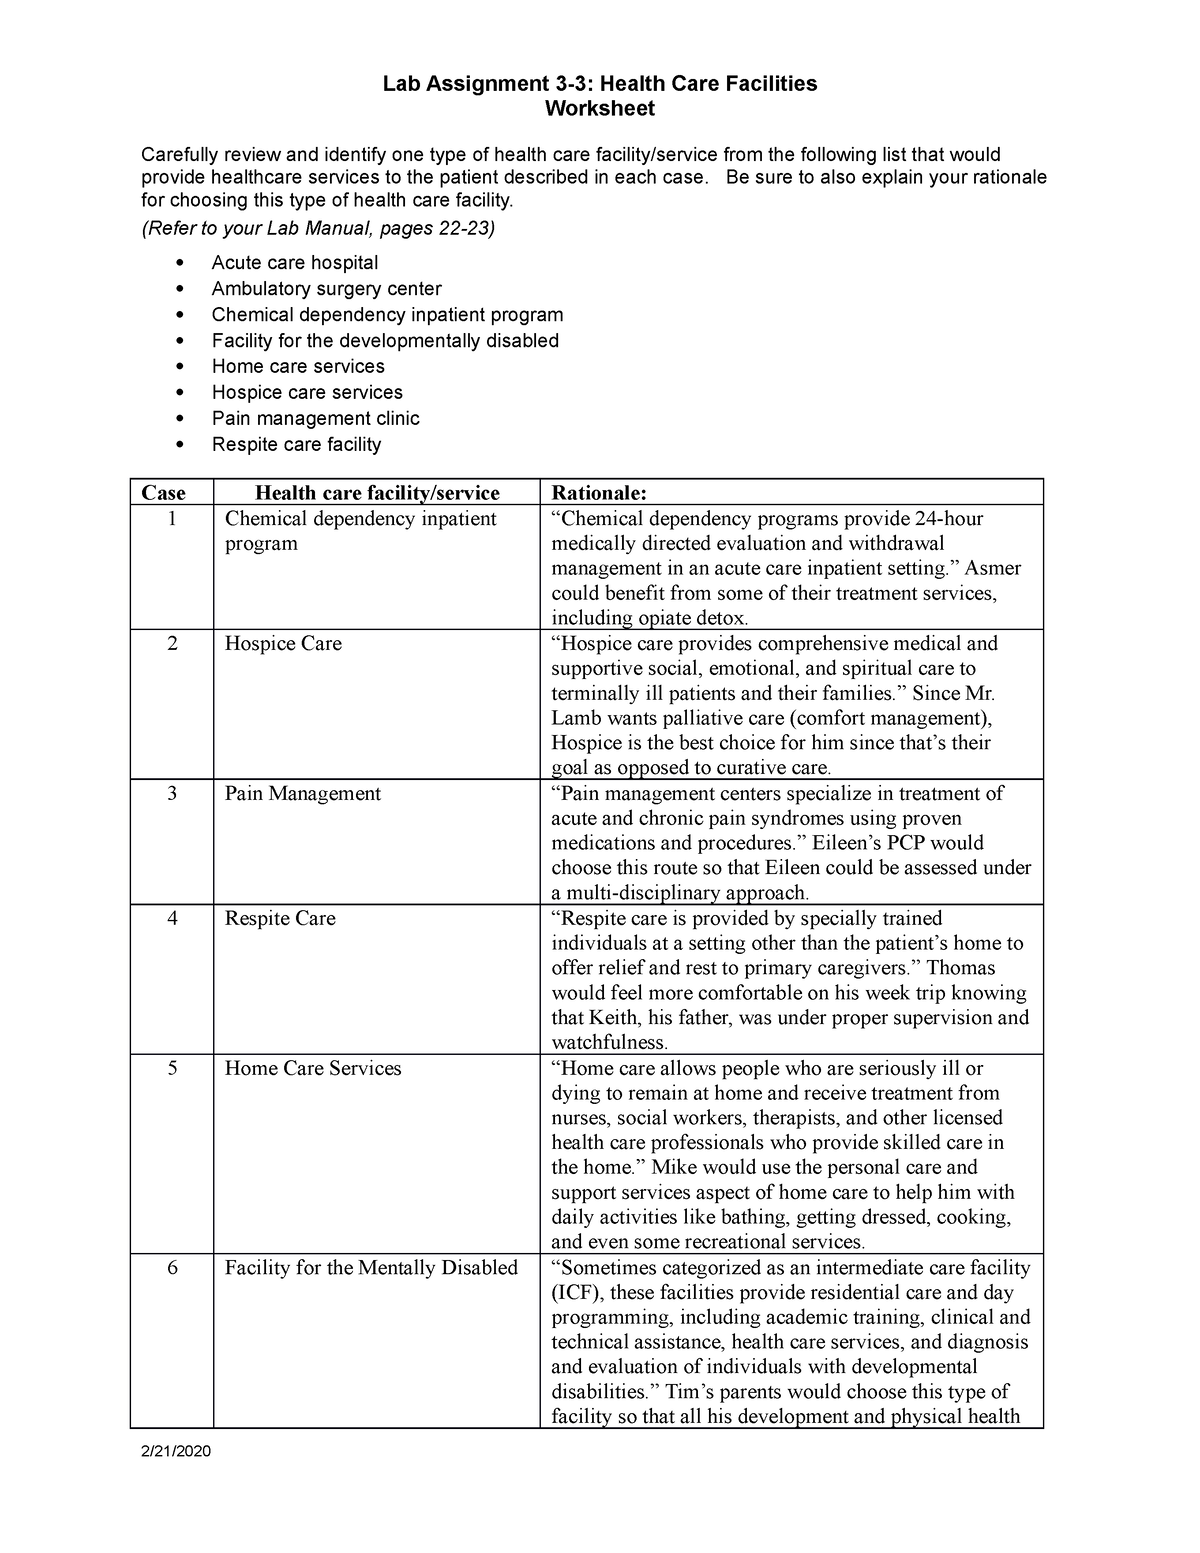 Lab 3-3 Health Care Facilities worksheet - Lab Assignment 3-3: Health ...